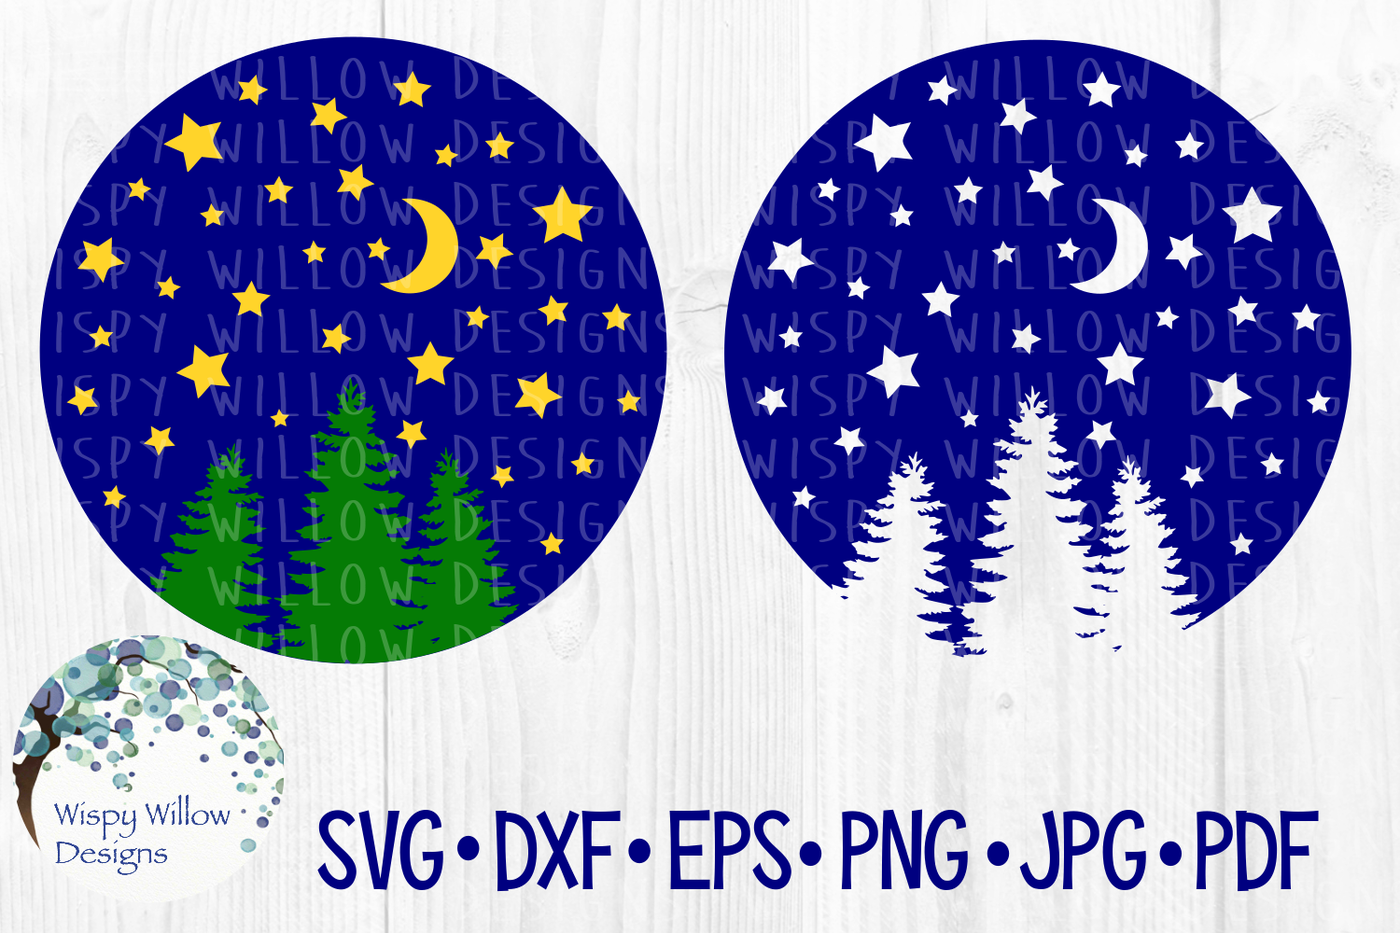 Download Night Sky Silhouette Svg Dxf Eps Png Jpg Pdf By Wispy Willow Designs Thehungryjpeg Com